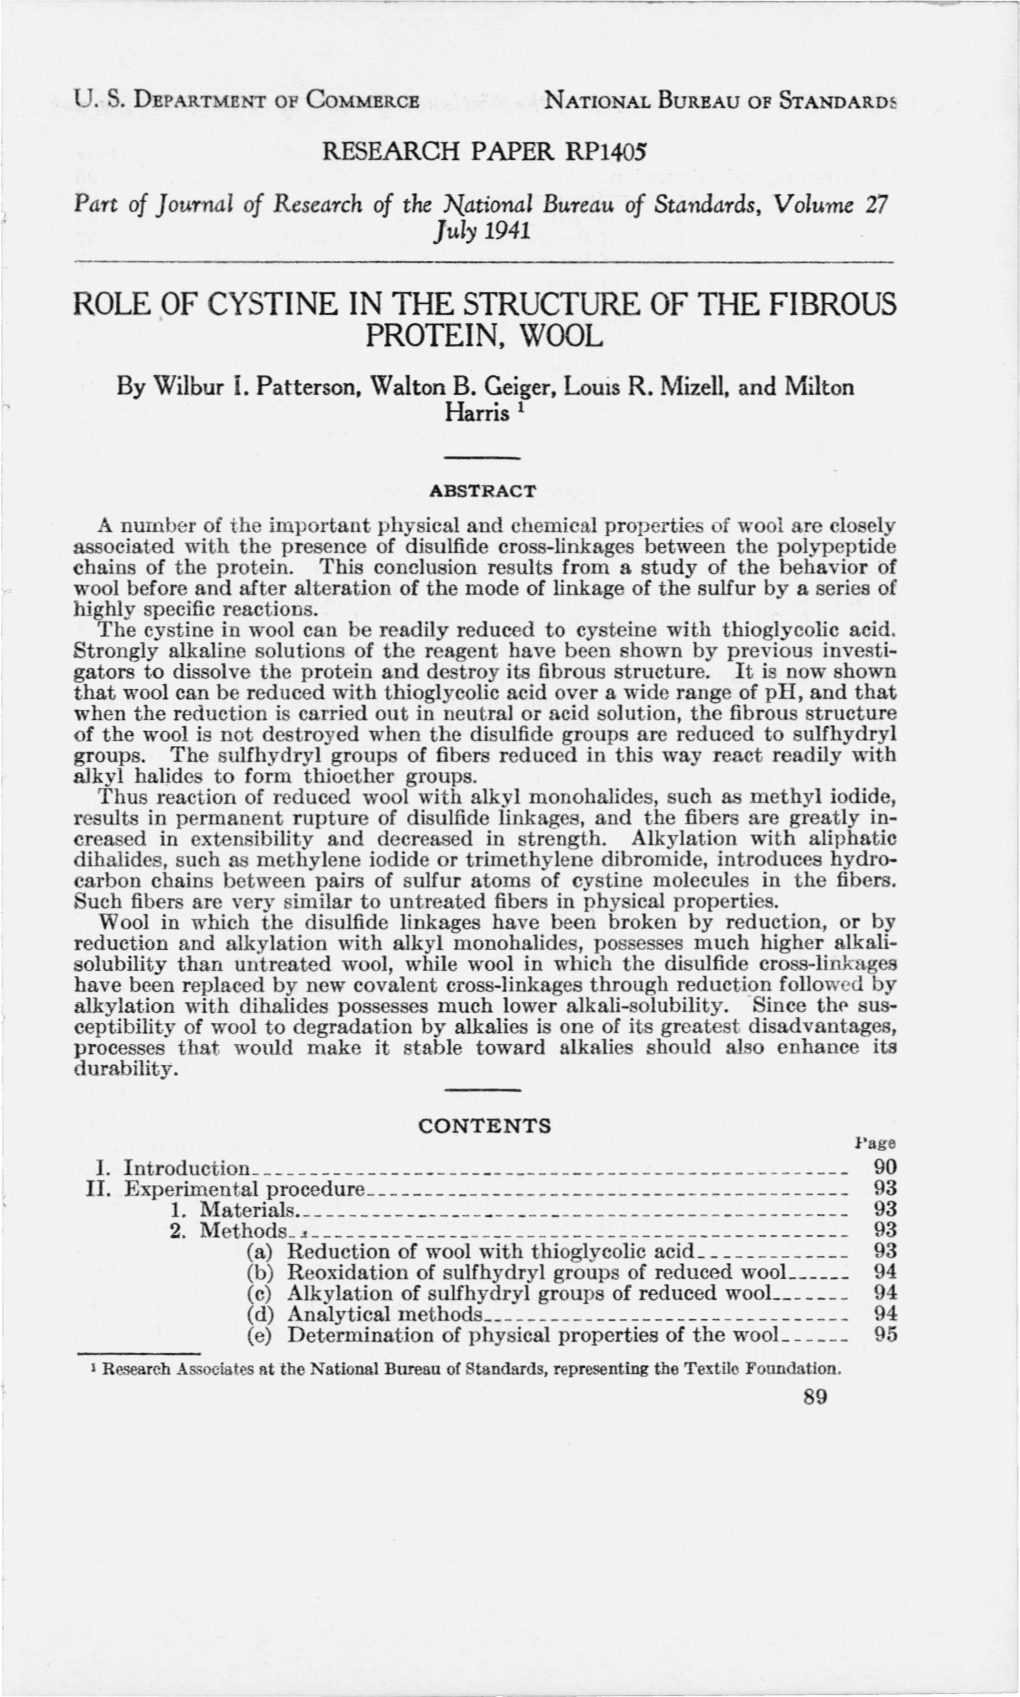 ROLE of CYSTINE in the STRUCTURE of the FIBROUS PROTEIN, WOOL by Wilbur I